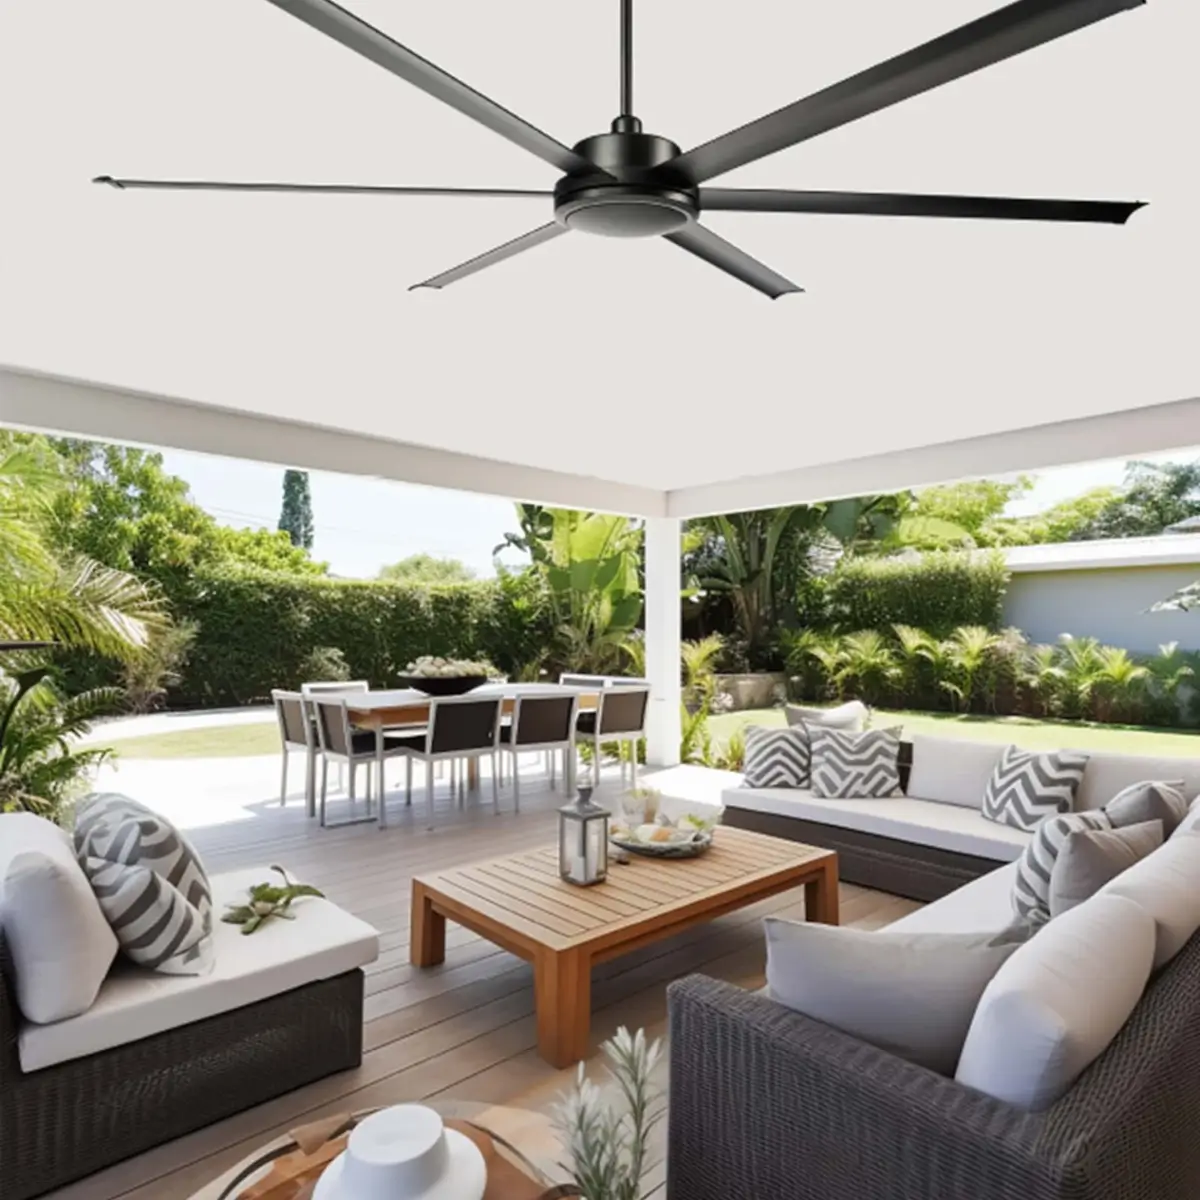 Image of a Colossus large scale fan over a patio space